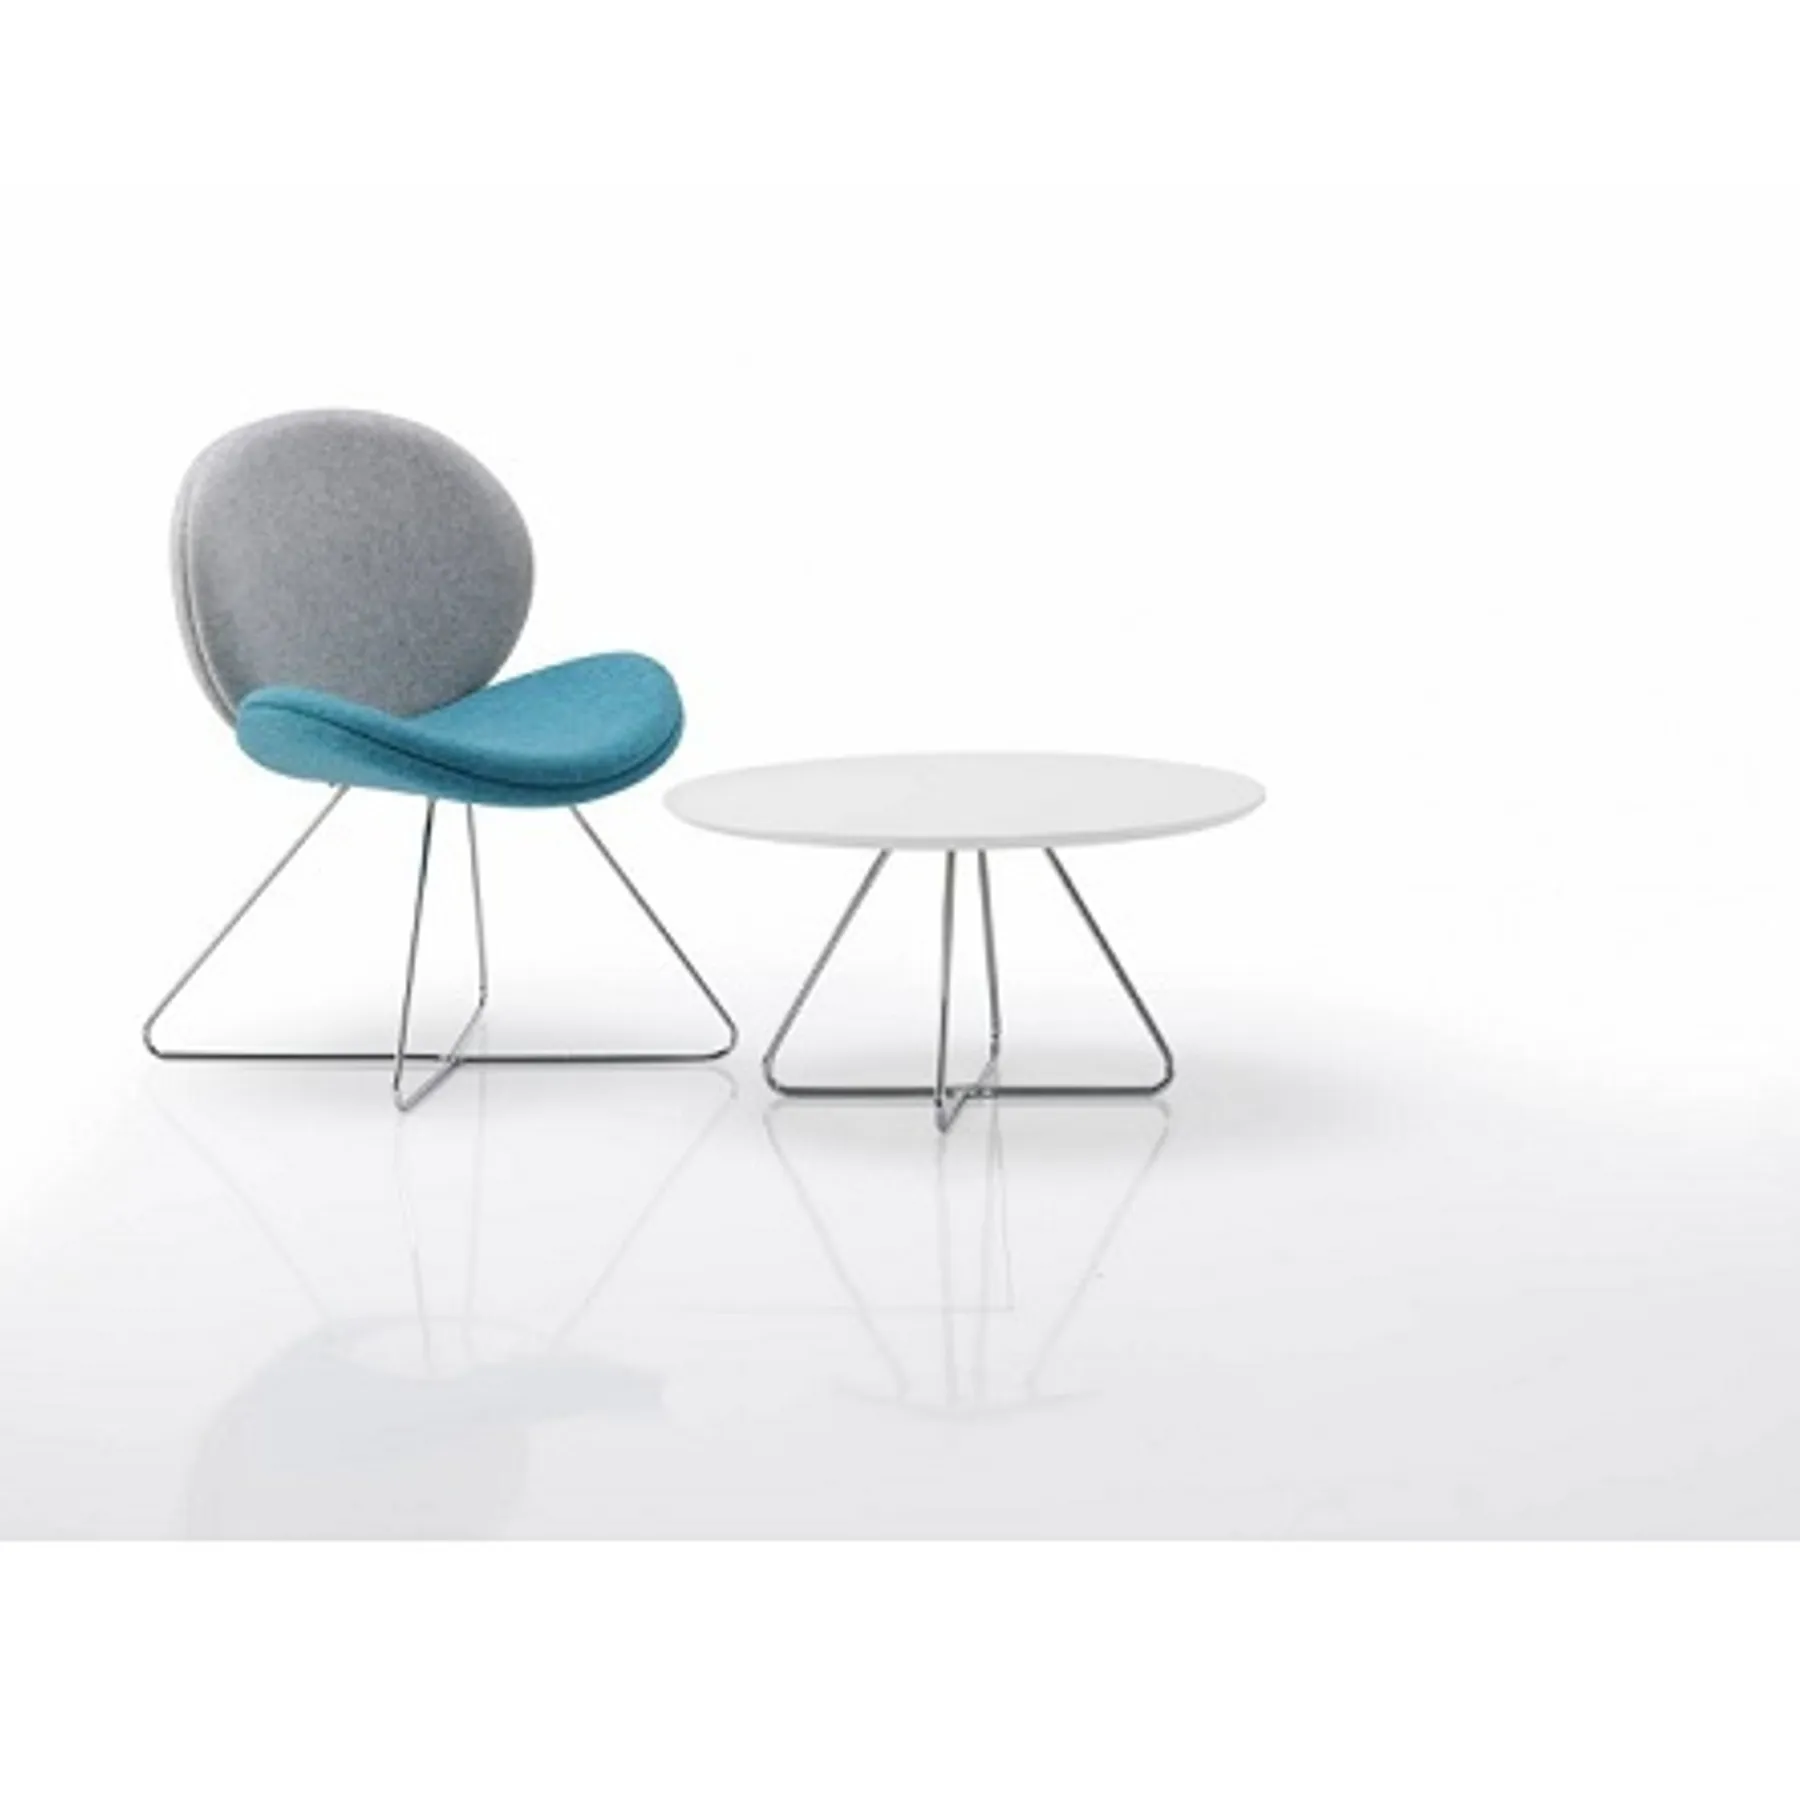 Lof Direct Giggle Chair ocee design giggle4 with white coffee table